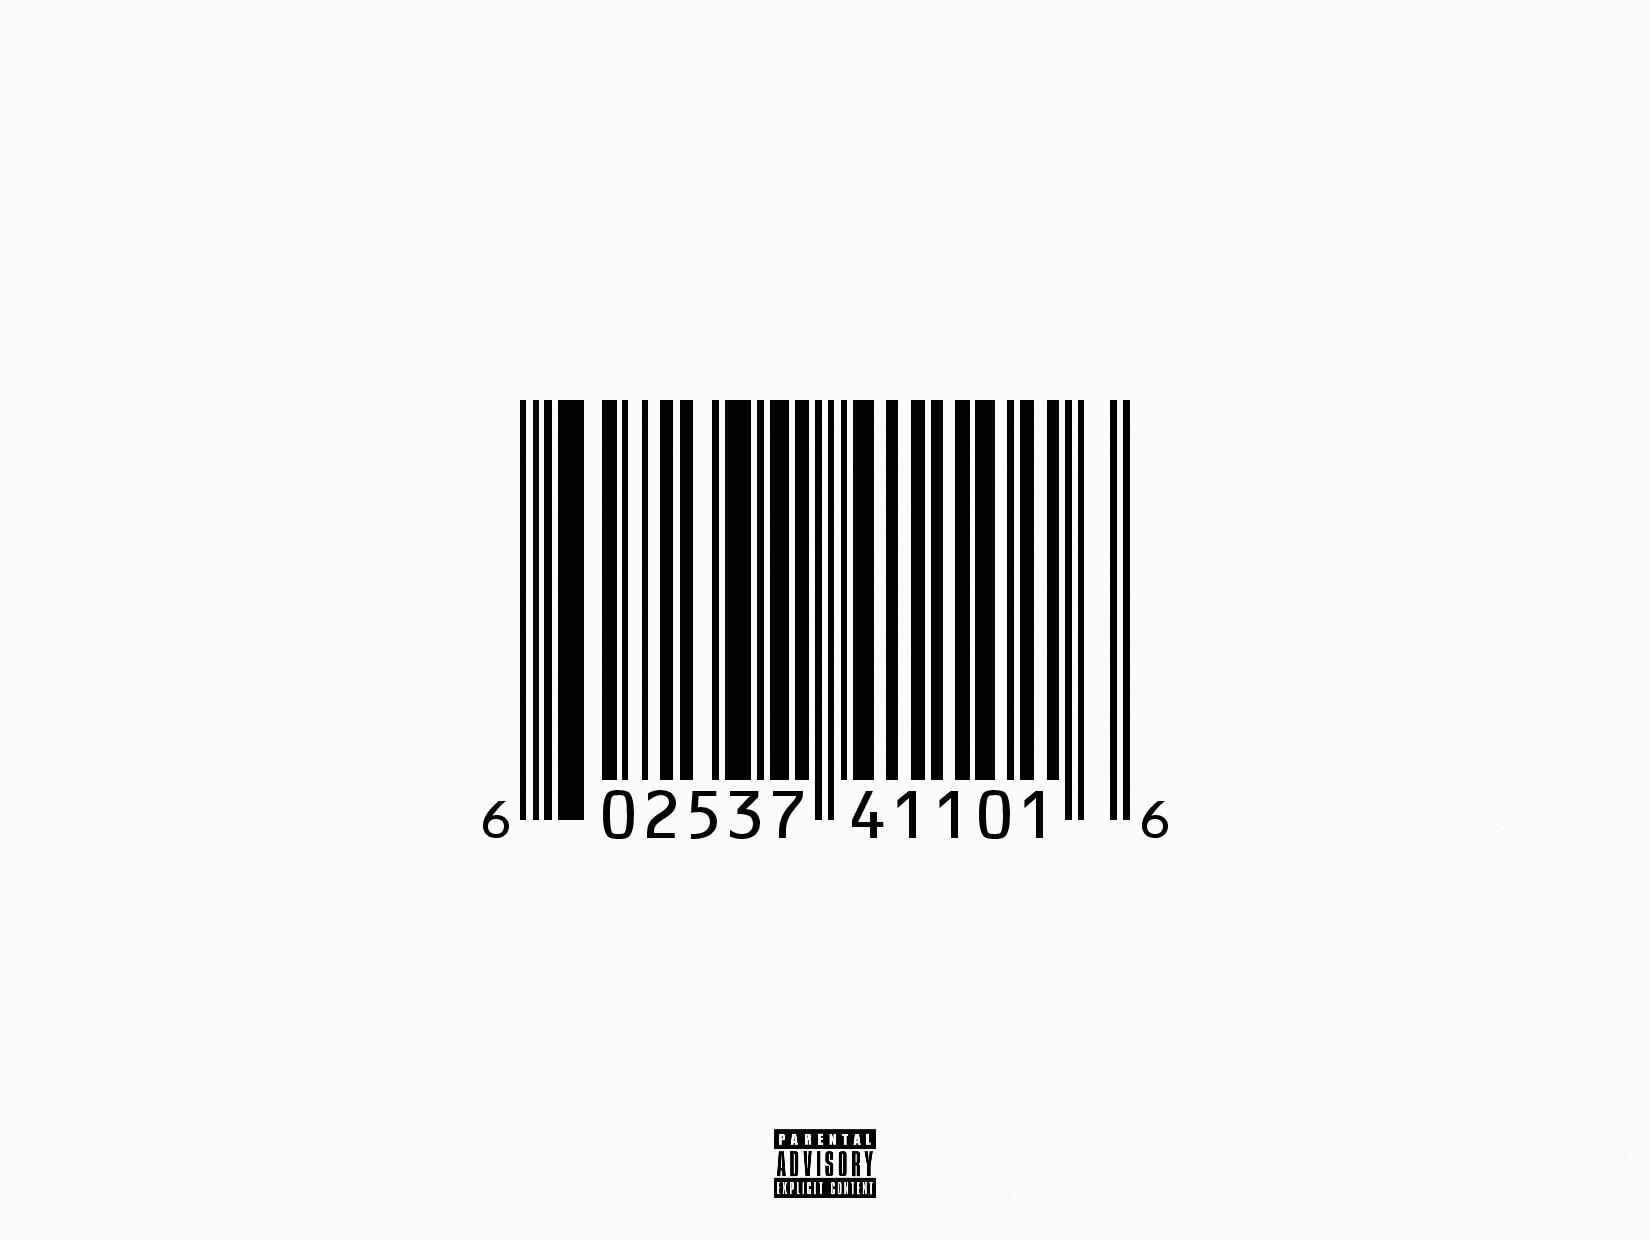 Pusha T My Name Is My Name Cover Art - HD Wallpaper 